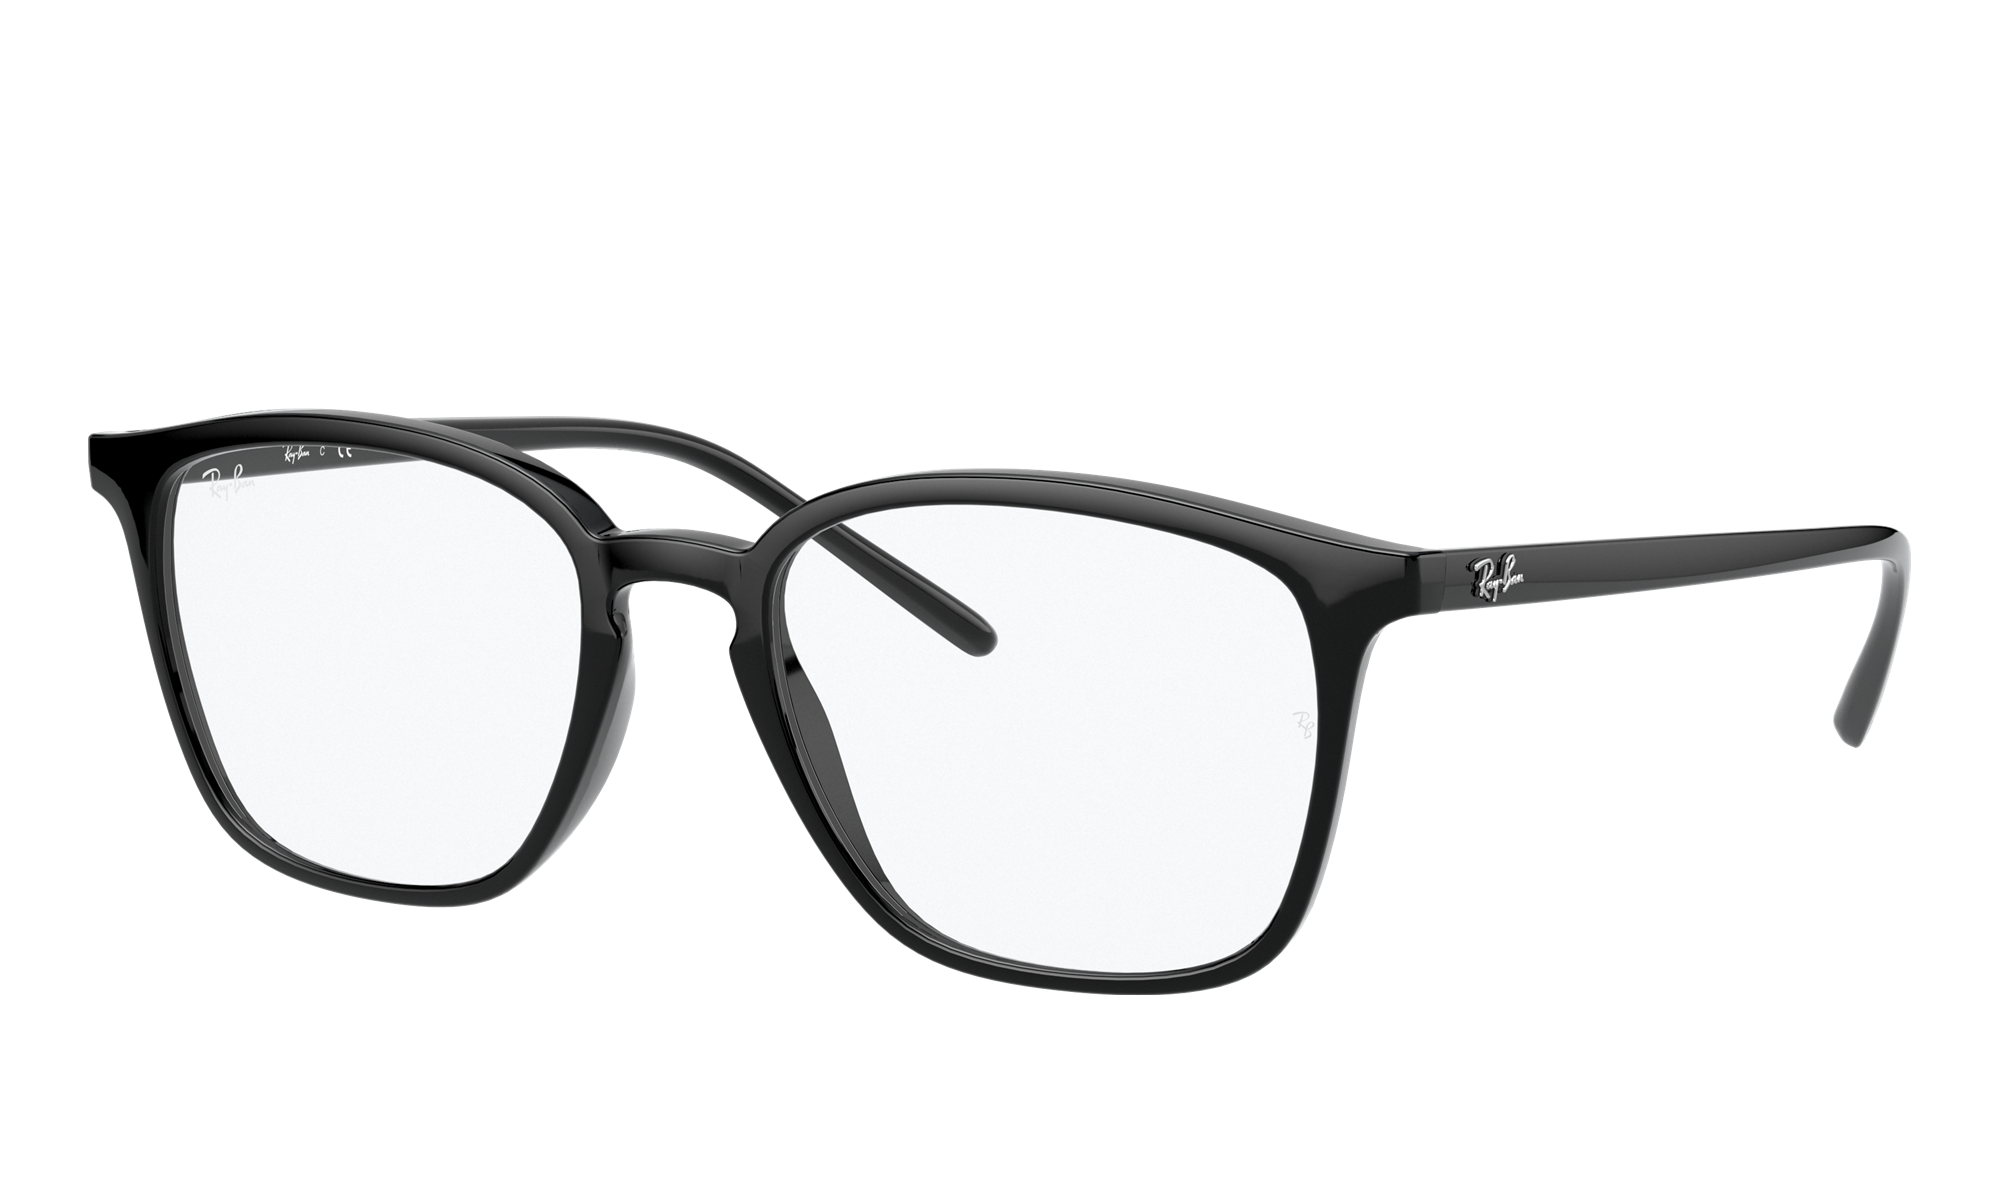 Ray-Ban Unisex Rx7185 Black Size: Small